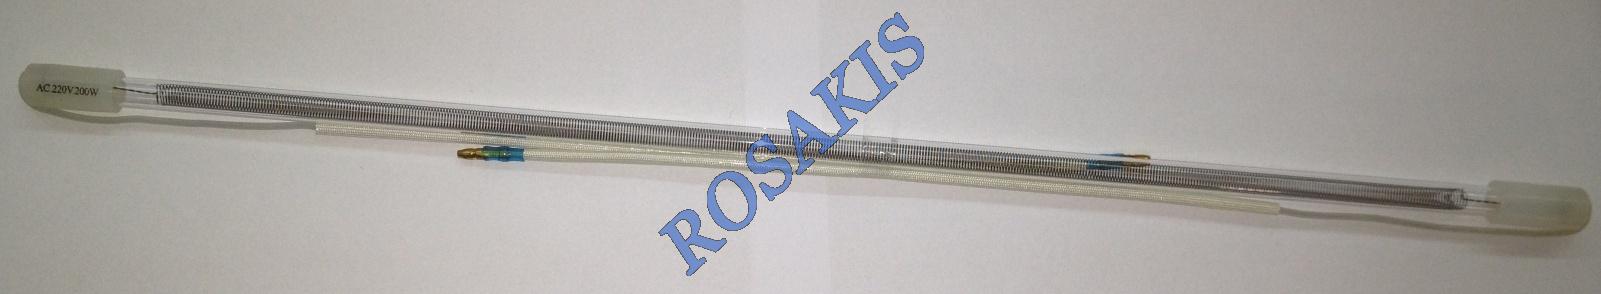 DEFROS.RESIST.GLASS TUBE SAMSUNG-GENERAL ELECTRIC 50,80c 20IN